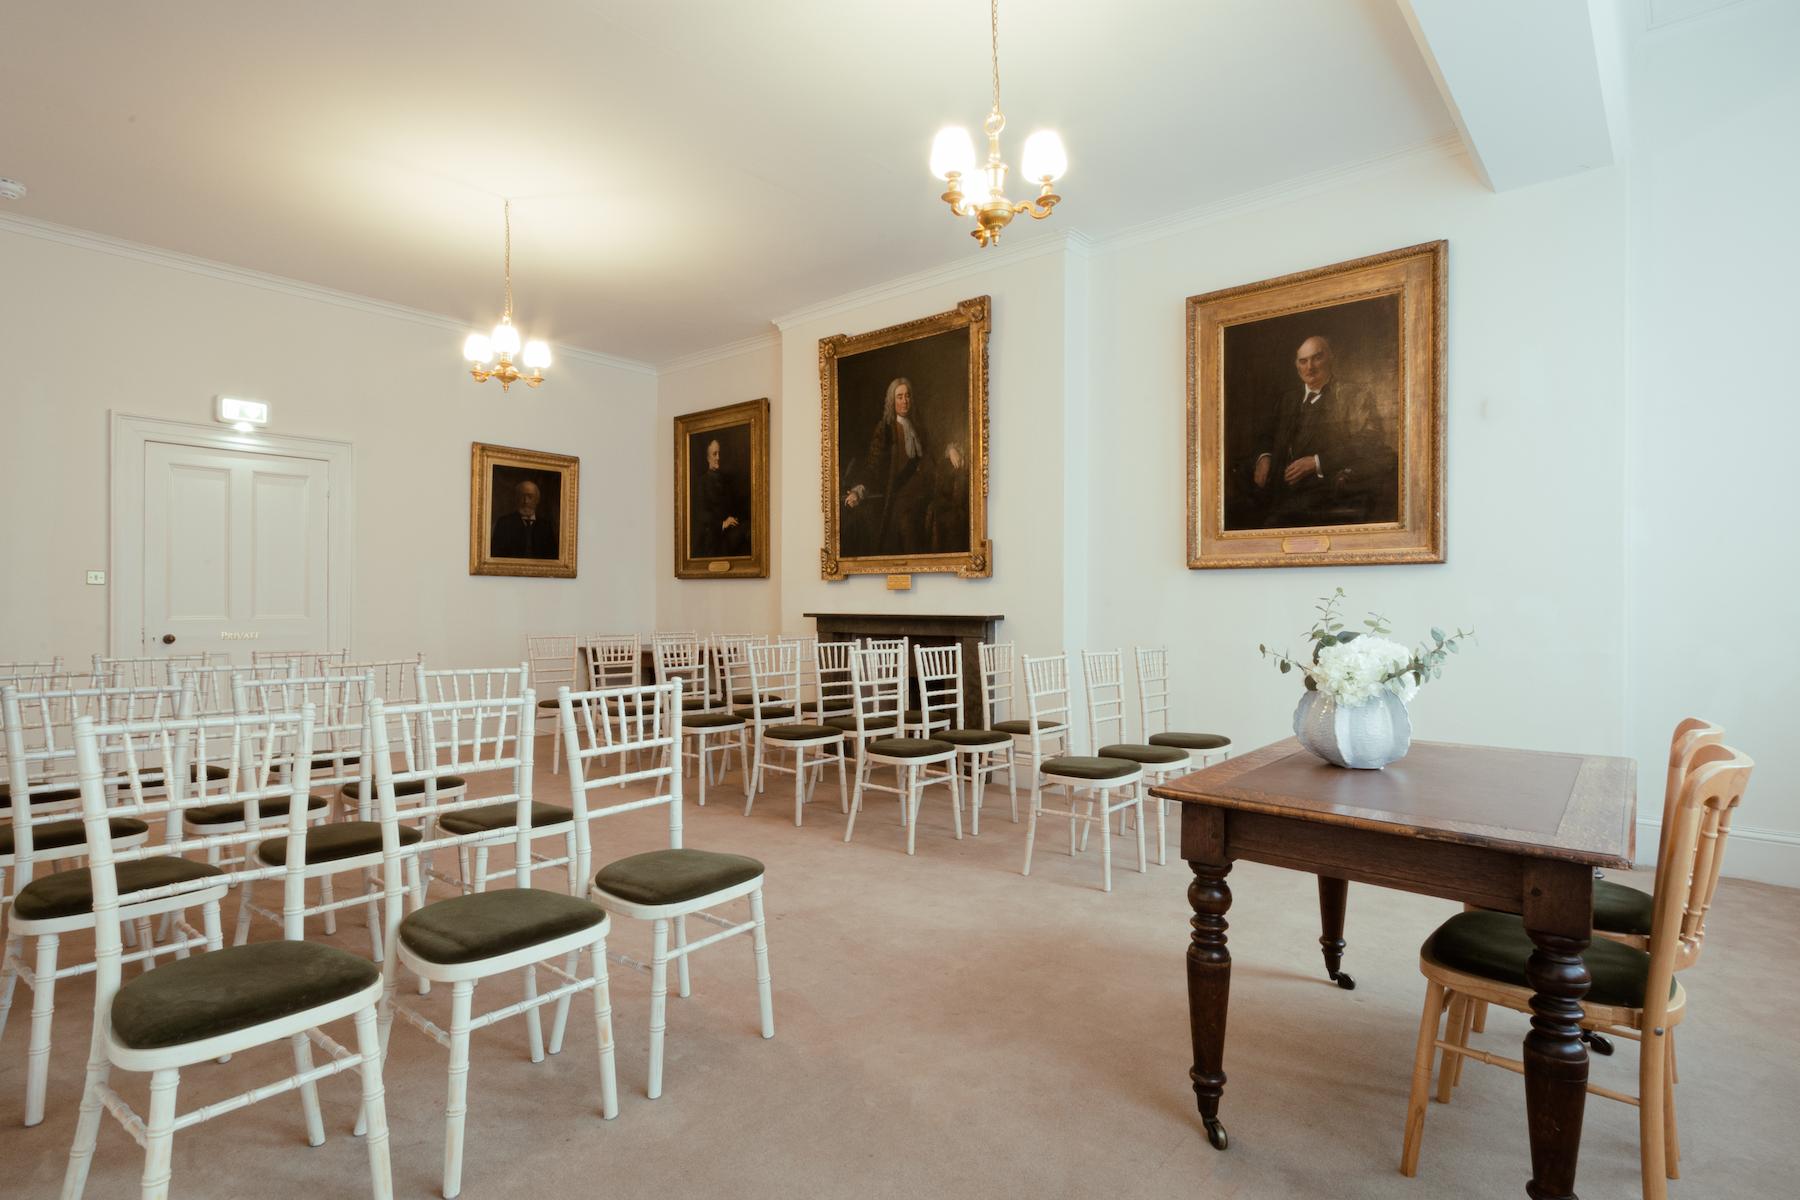 Photograph of High Sheriff's room